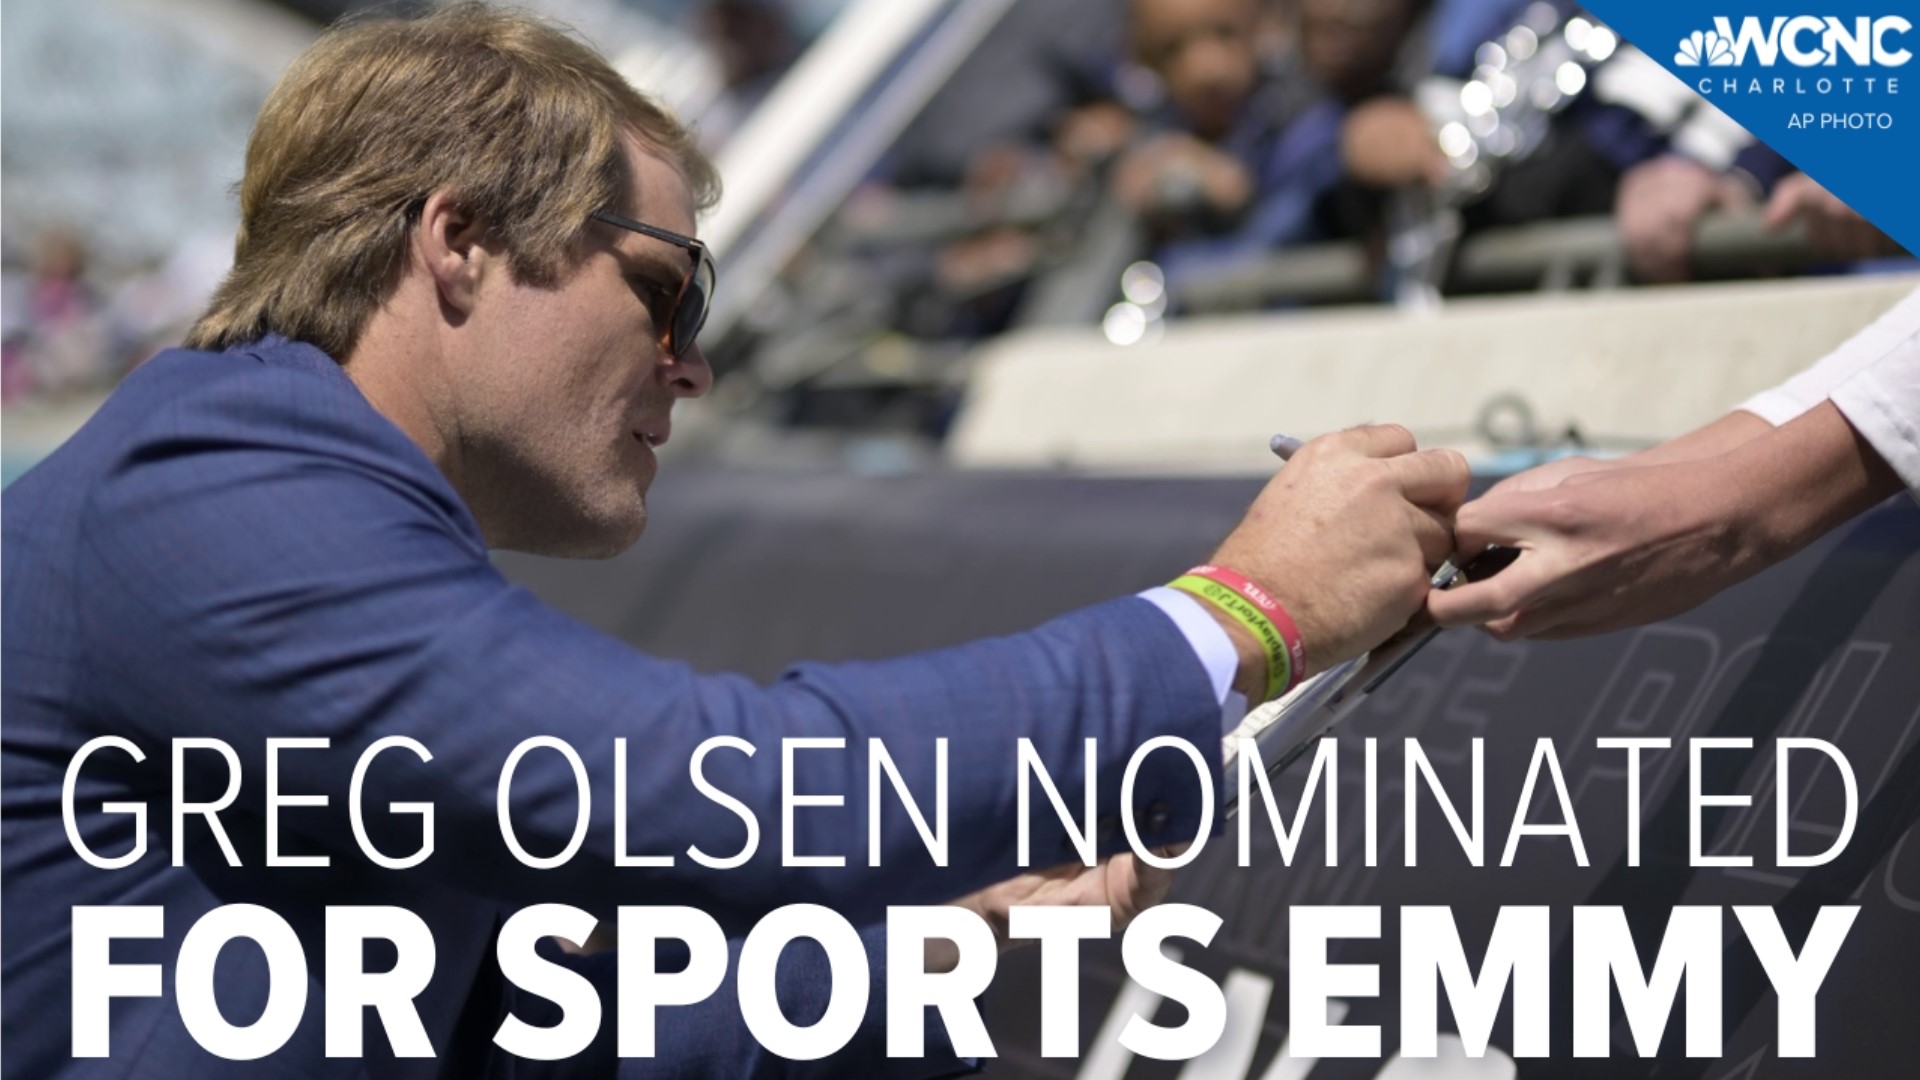 The former NFL tight end earned a Sports Emmy nomination for his work during Fox broadcasts last season.